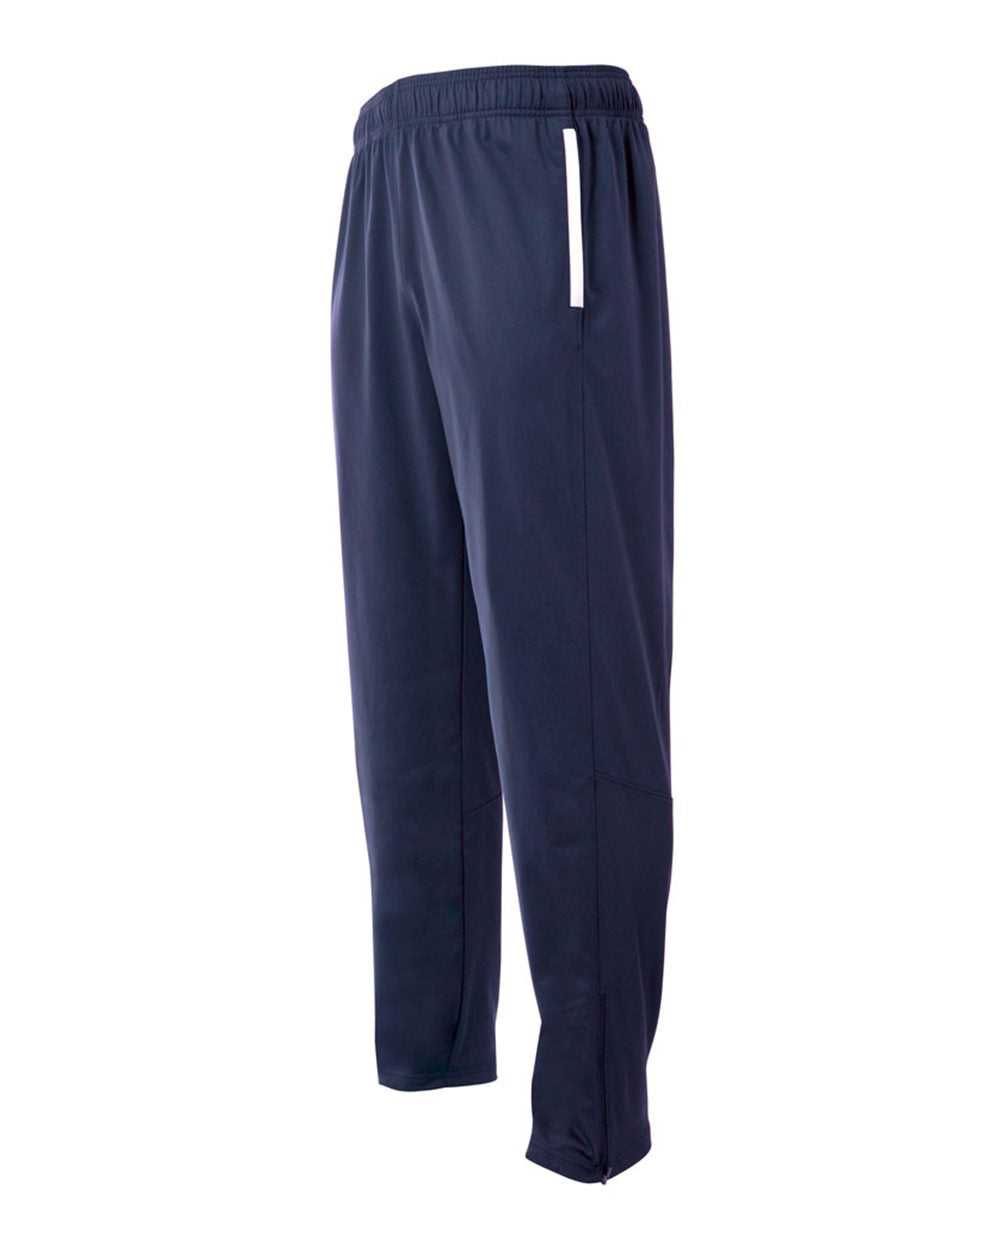 A4 NB6199 League Youth Warm Up Pant - Navy White - HIT a Double